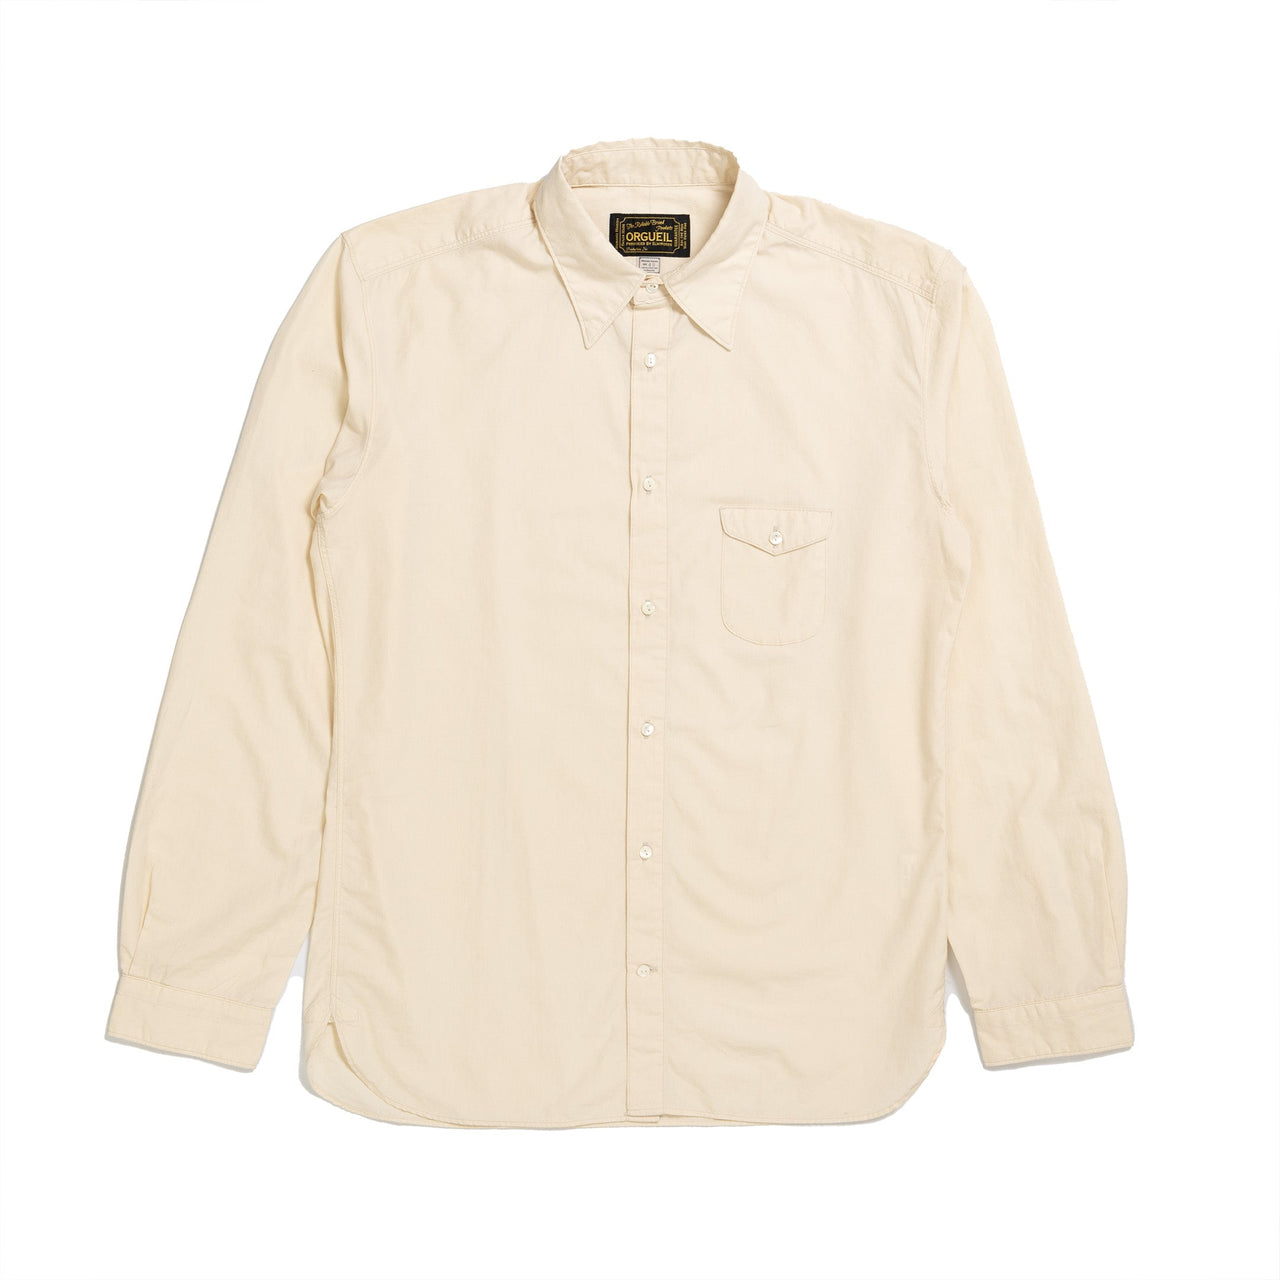 Orgueil OR-5001A Classic Broad Shirt Ivory-Shirts-Clutch Cafe